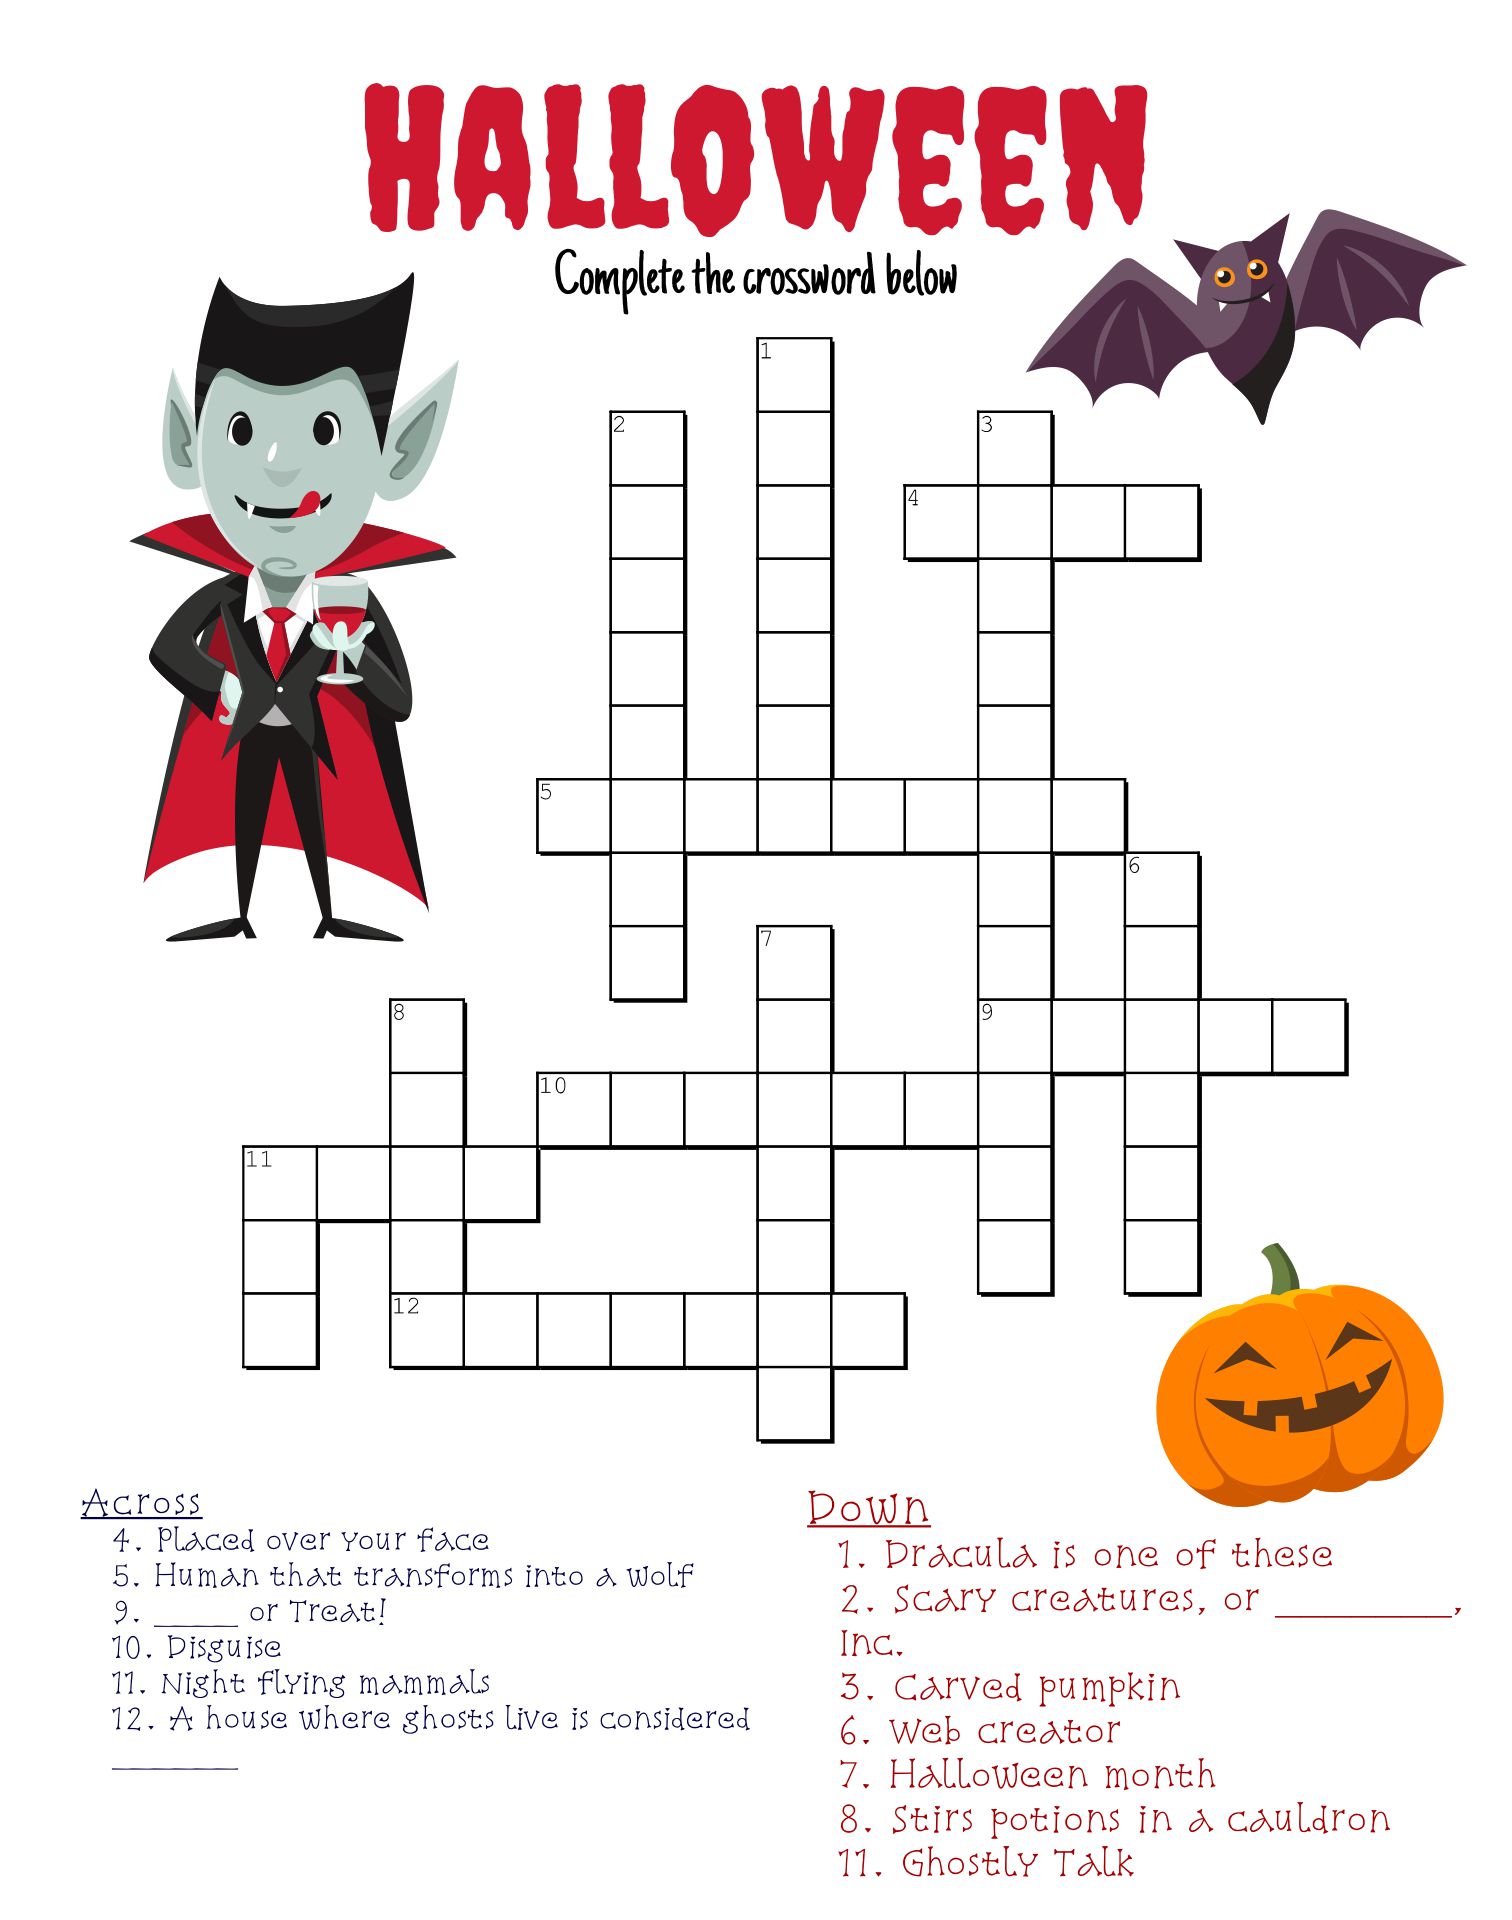 free-printable-themed-crossword-puzzles-halloween-weekly-themed-crossword-puzzle-bvnwnews